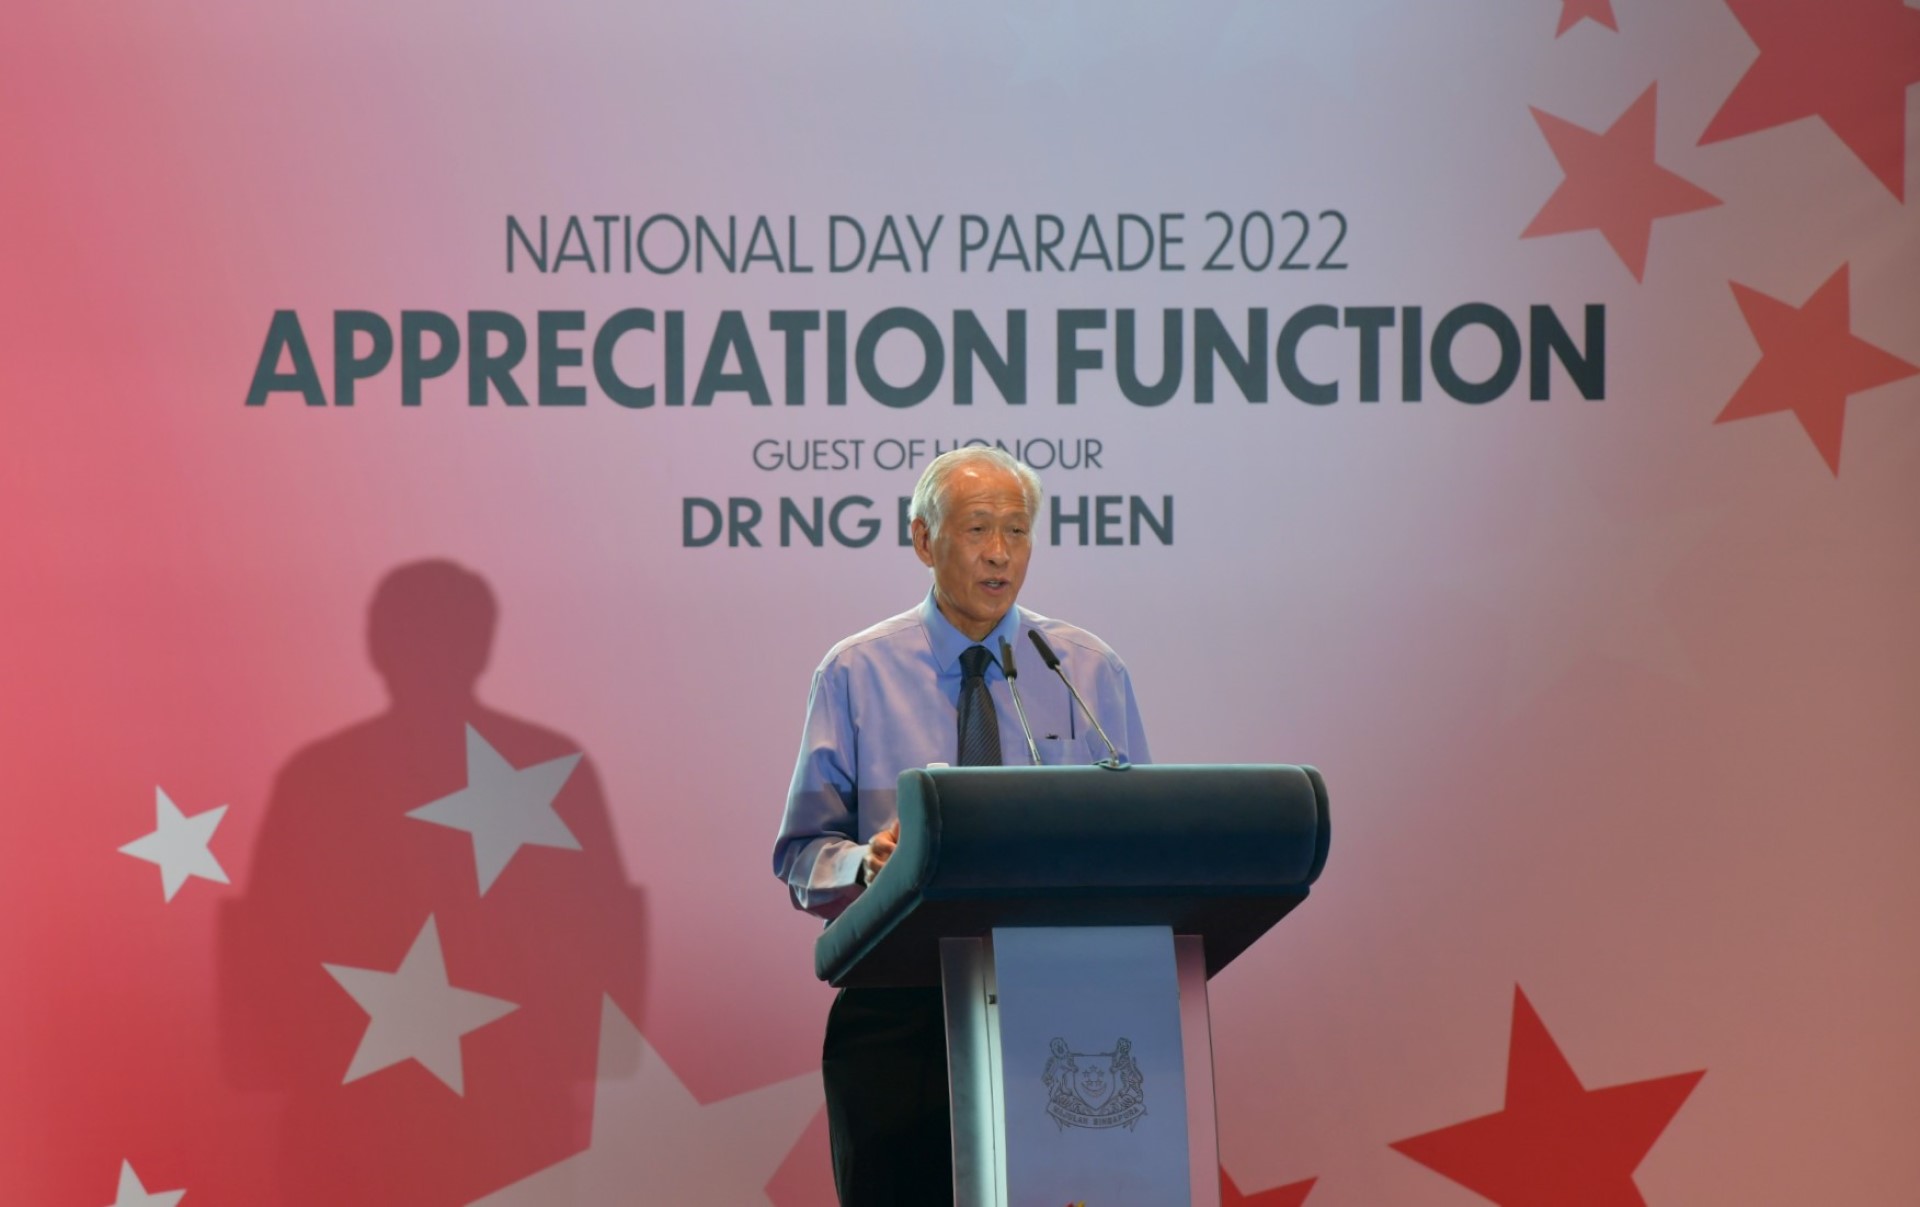 Minister for Defence Dr Ng Eng Hen delivering a speech during the National Day Parade (NDP) 2022 Appreciation Function this afternoon.